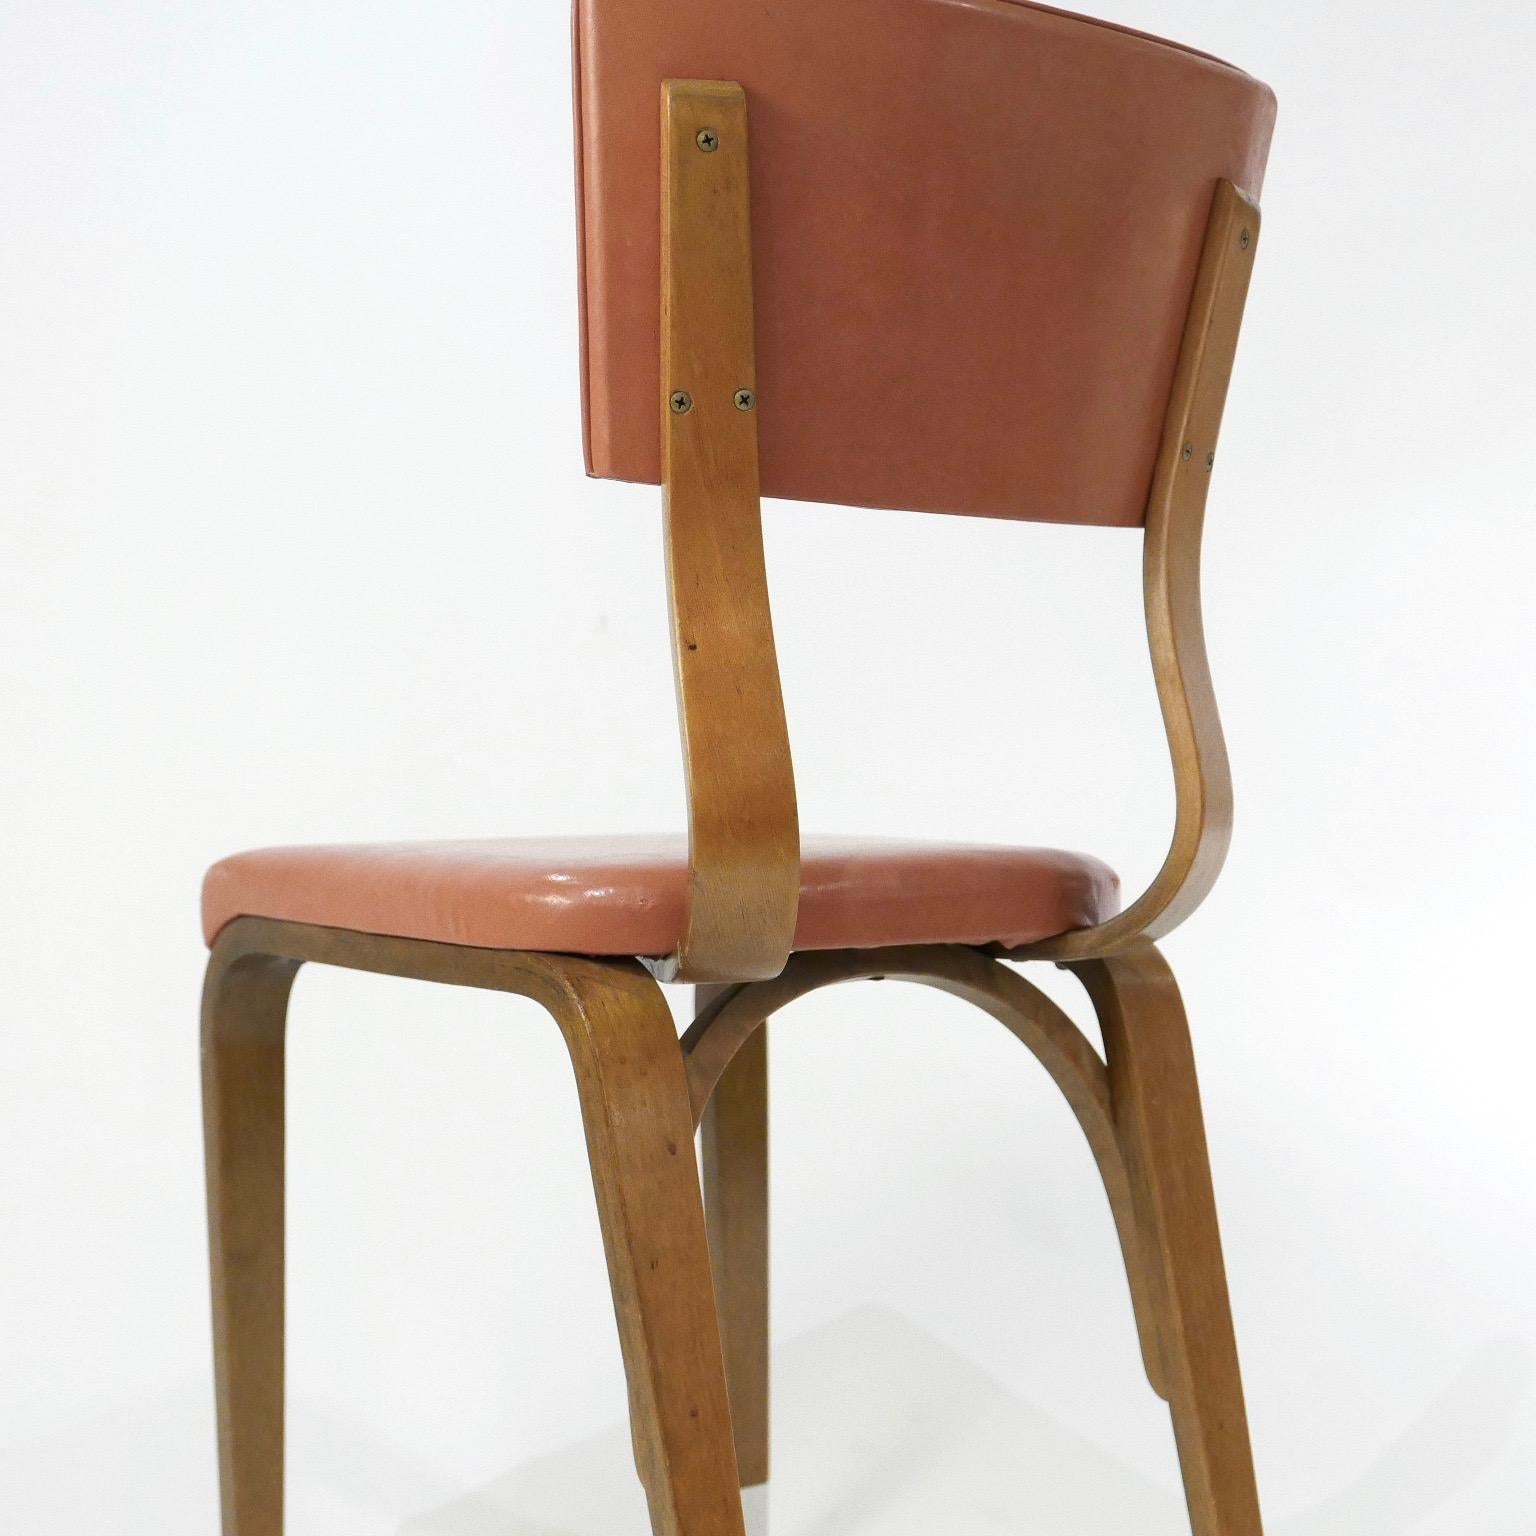 Molded 1950s Thonet Bentwood Bent Plywood Dining, Cafe or Desk Chairs,